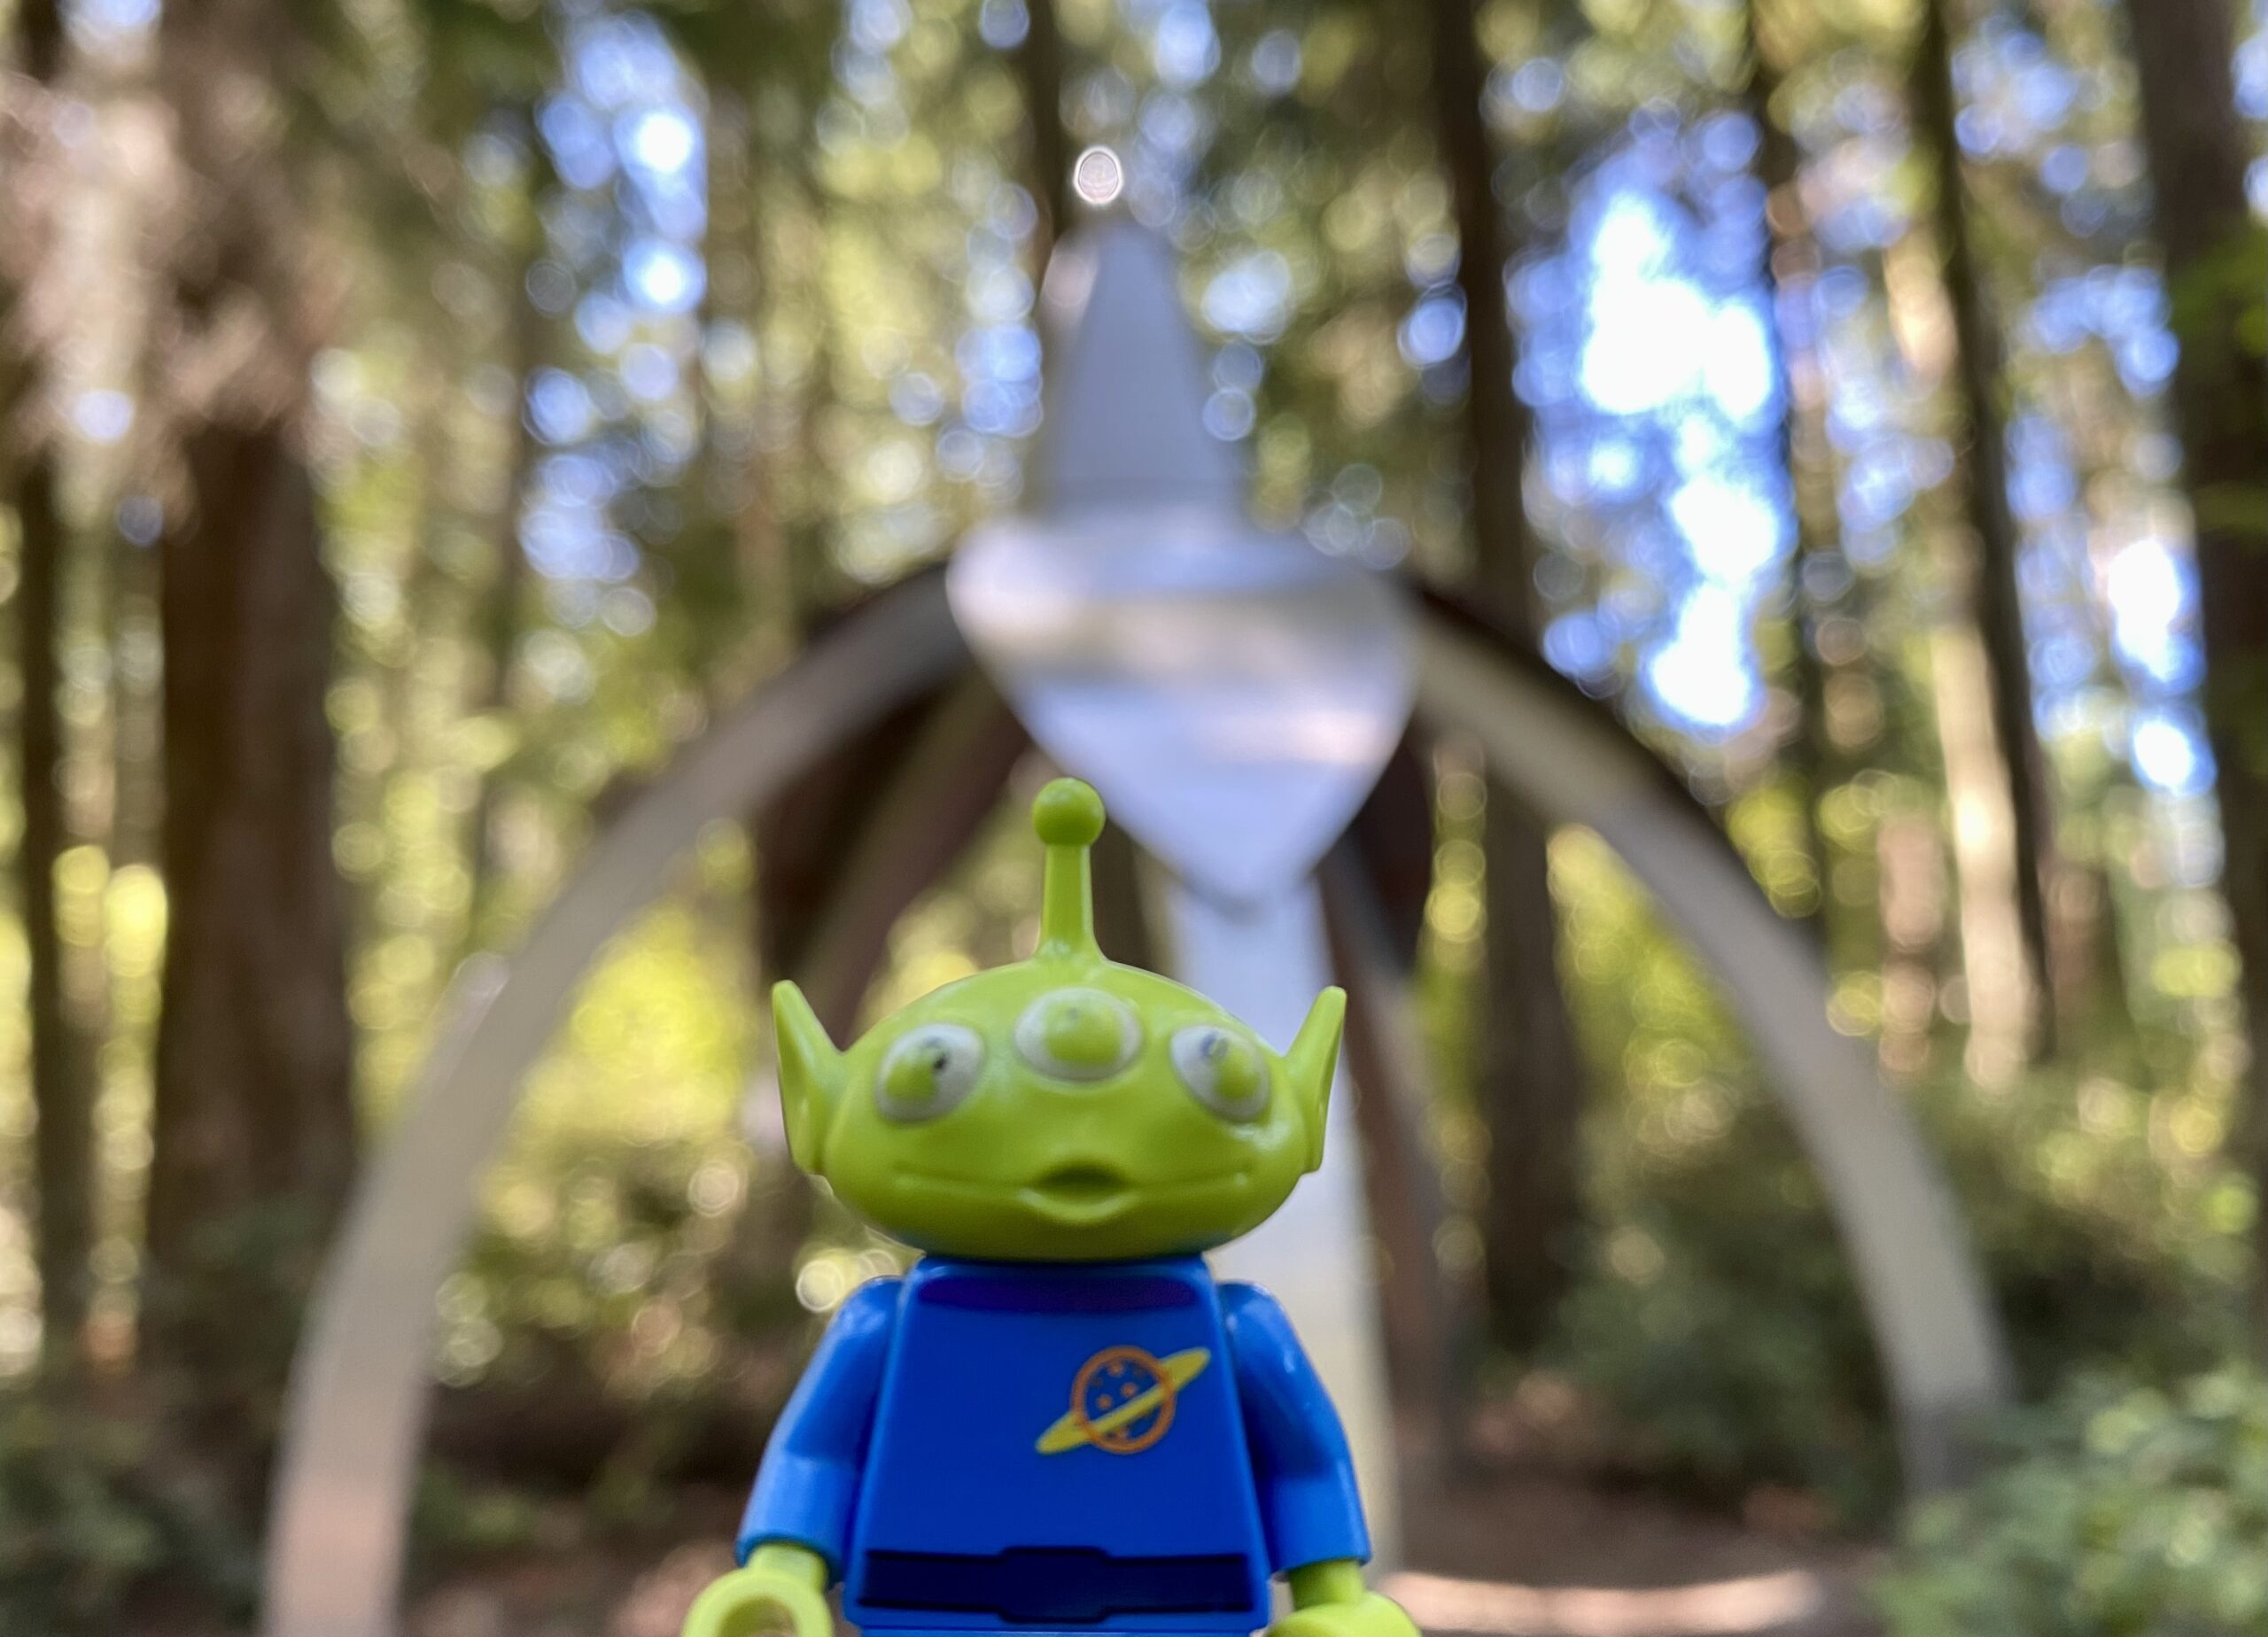 Pentillium by Gary Gunderson with Lego figure at Price Sculpture Forest - photo by Jay Epelman